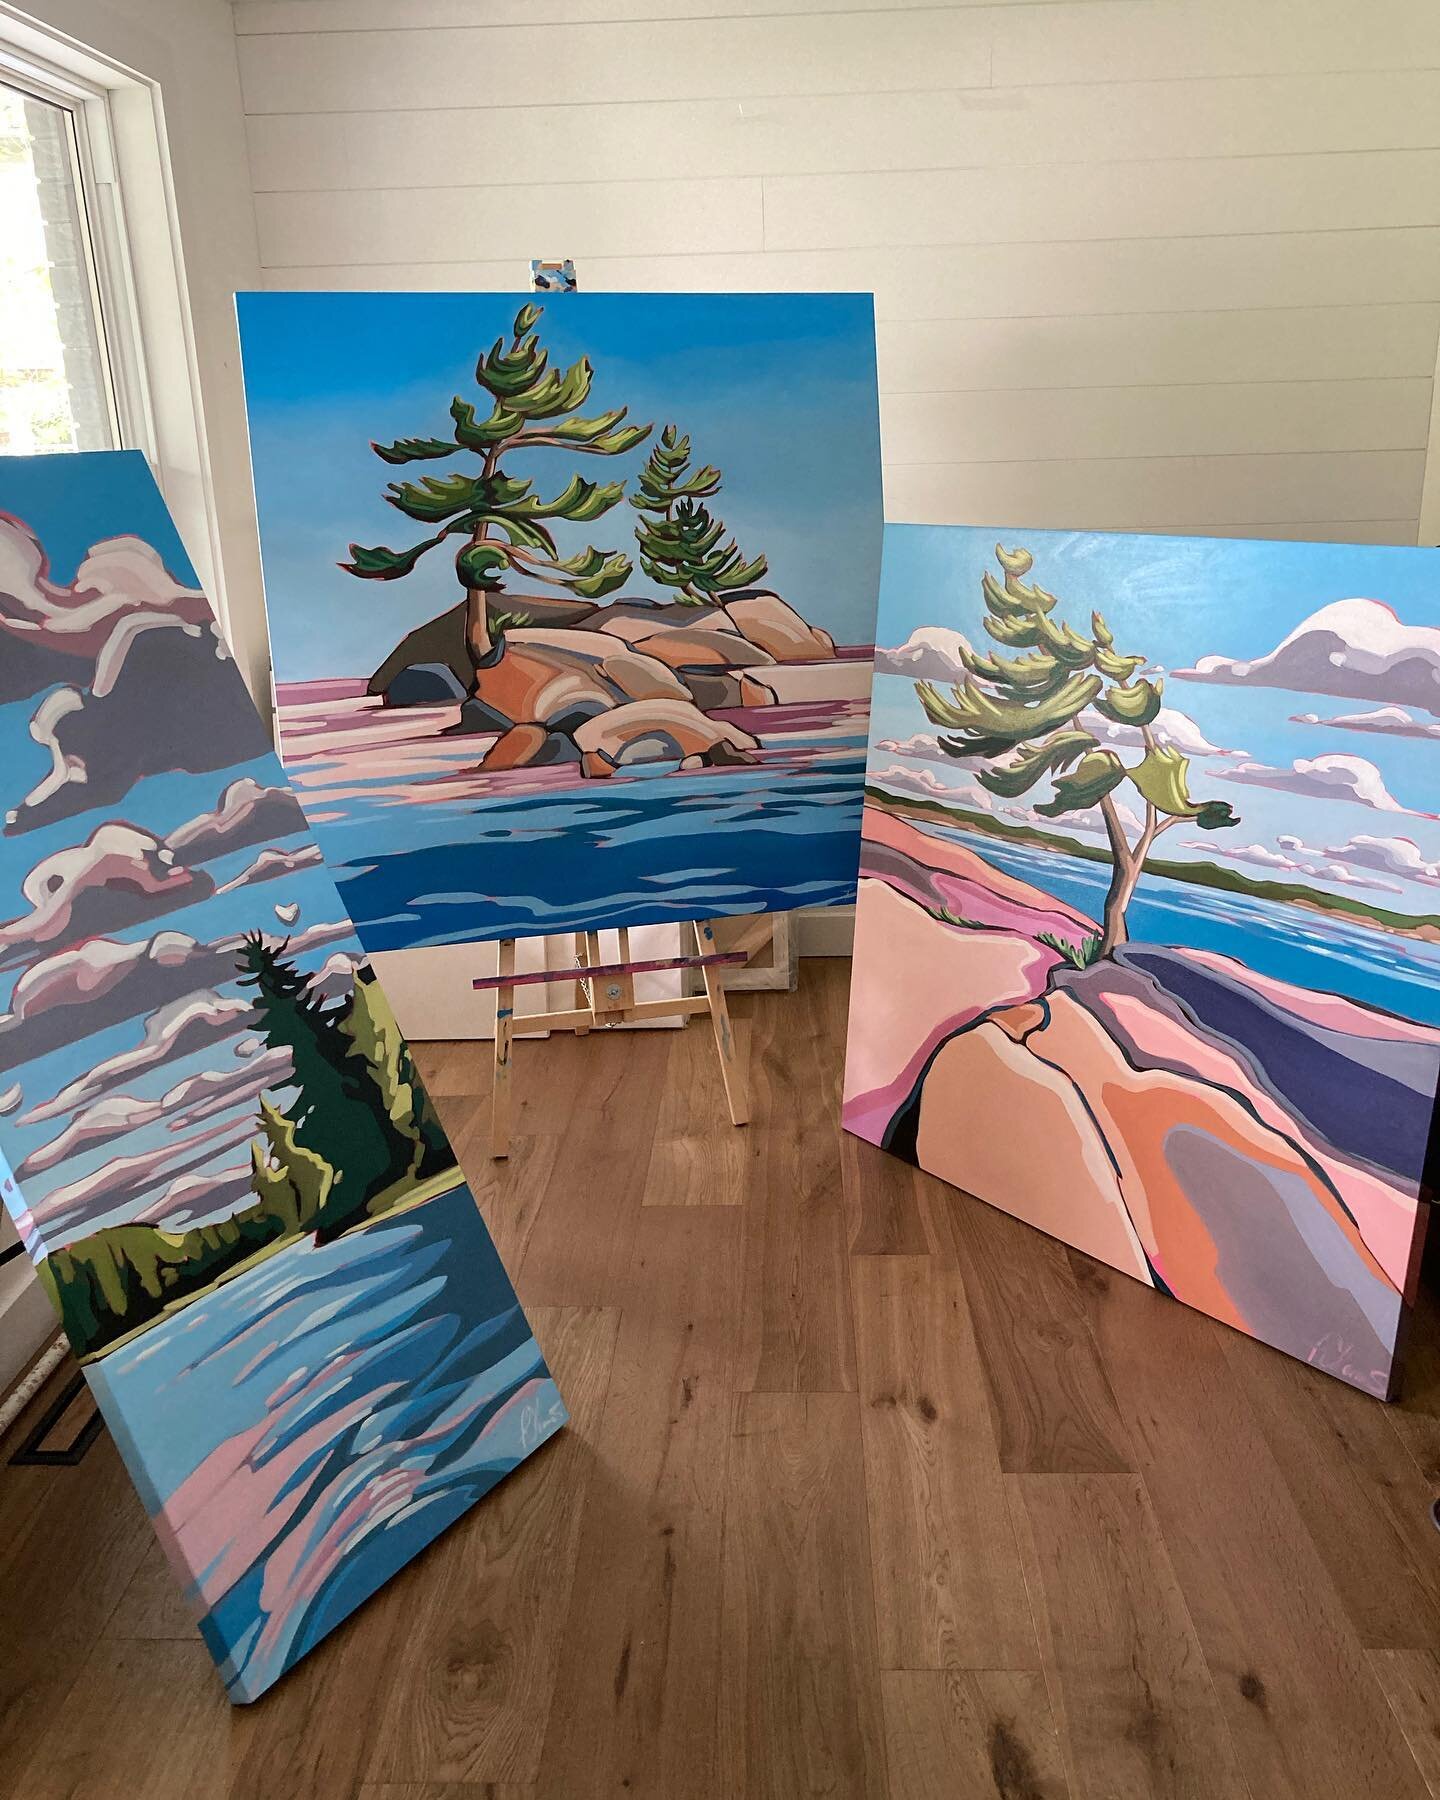 3 new babies getting their varnish and wiring today and will be available through @cloudgalleryca TOMORROW!#patriciaclemmenspaintings #oiloncanvas #longweekend #may24weekend #gallery #ontario #ontarioartist #new #newwork #georgianbay #cottage #lakeli